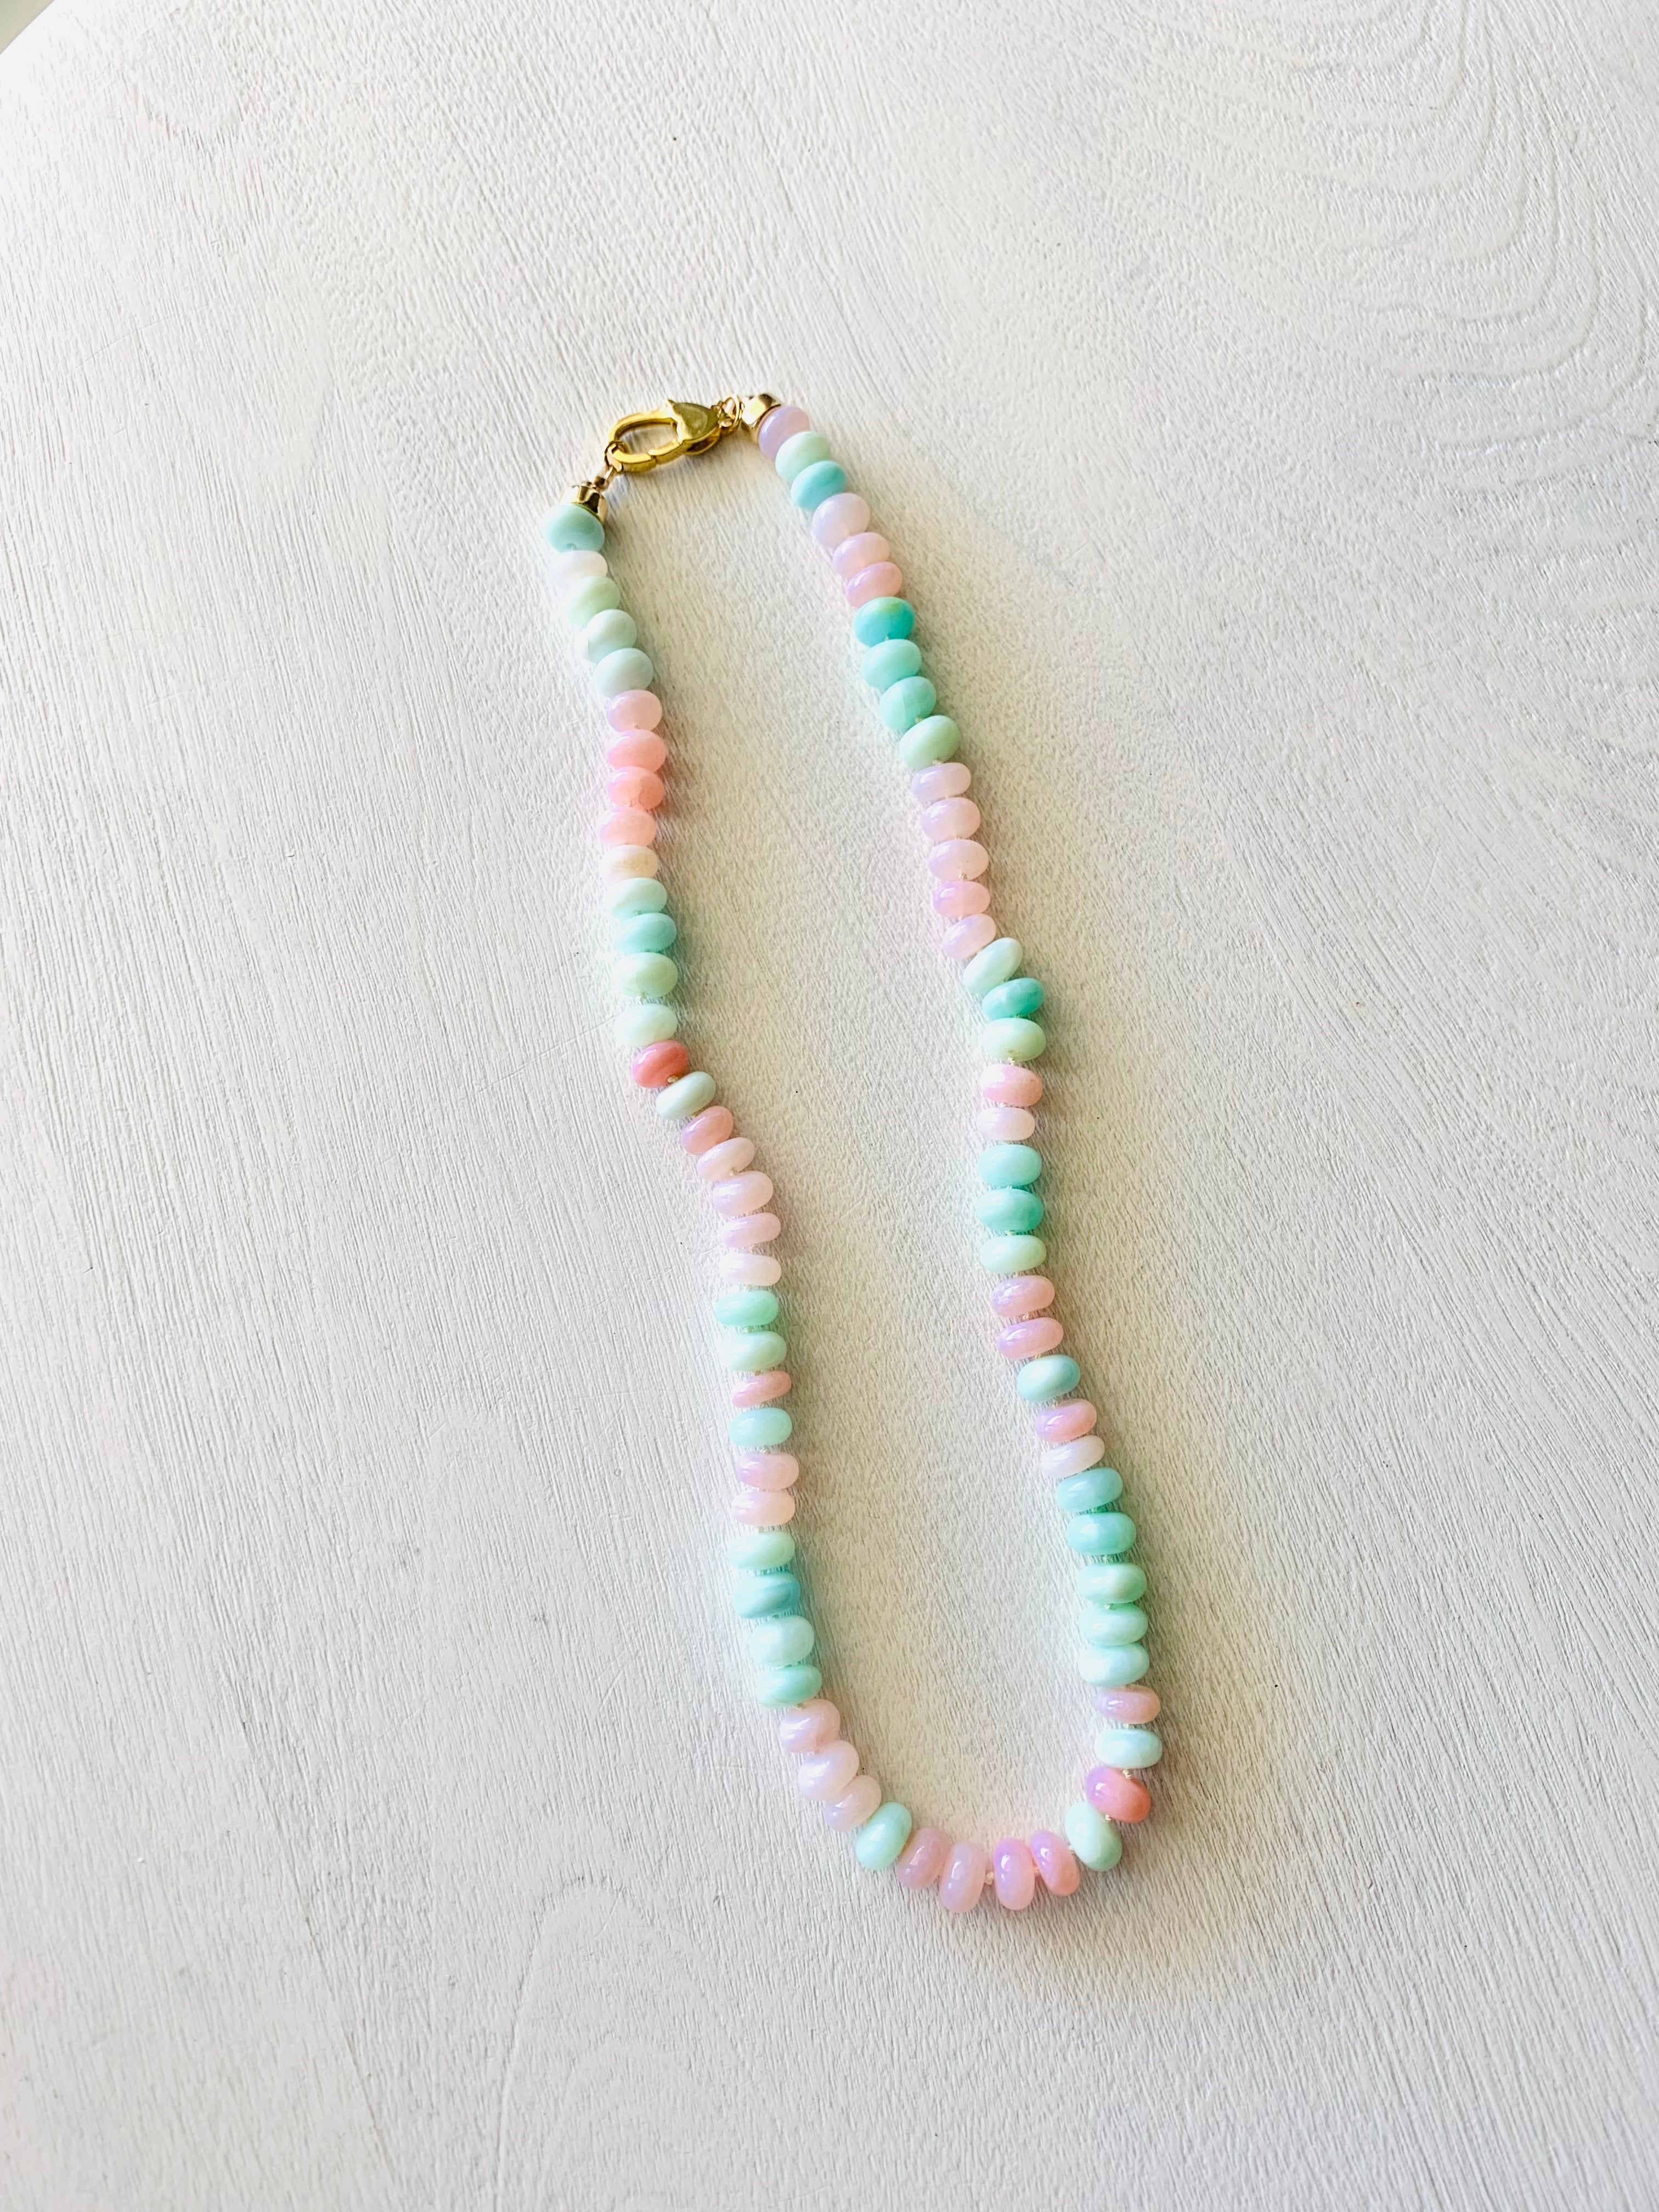 The Cotton Candy Opal Necklace